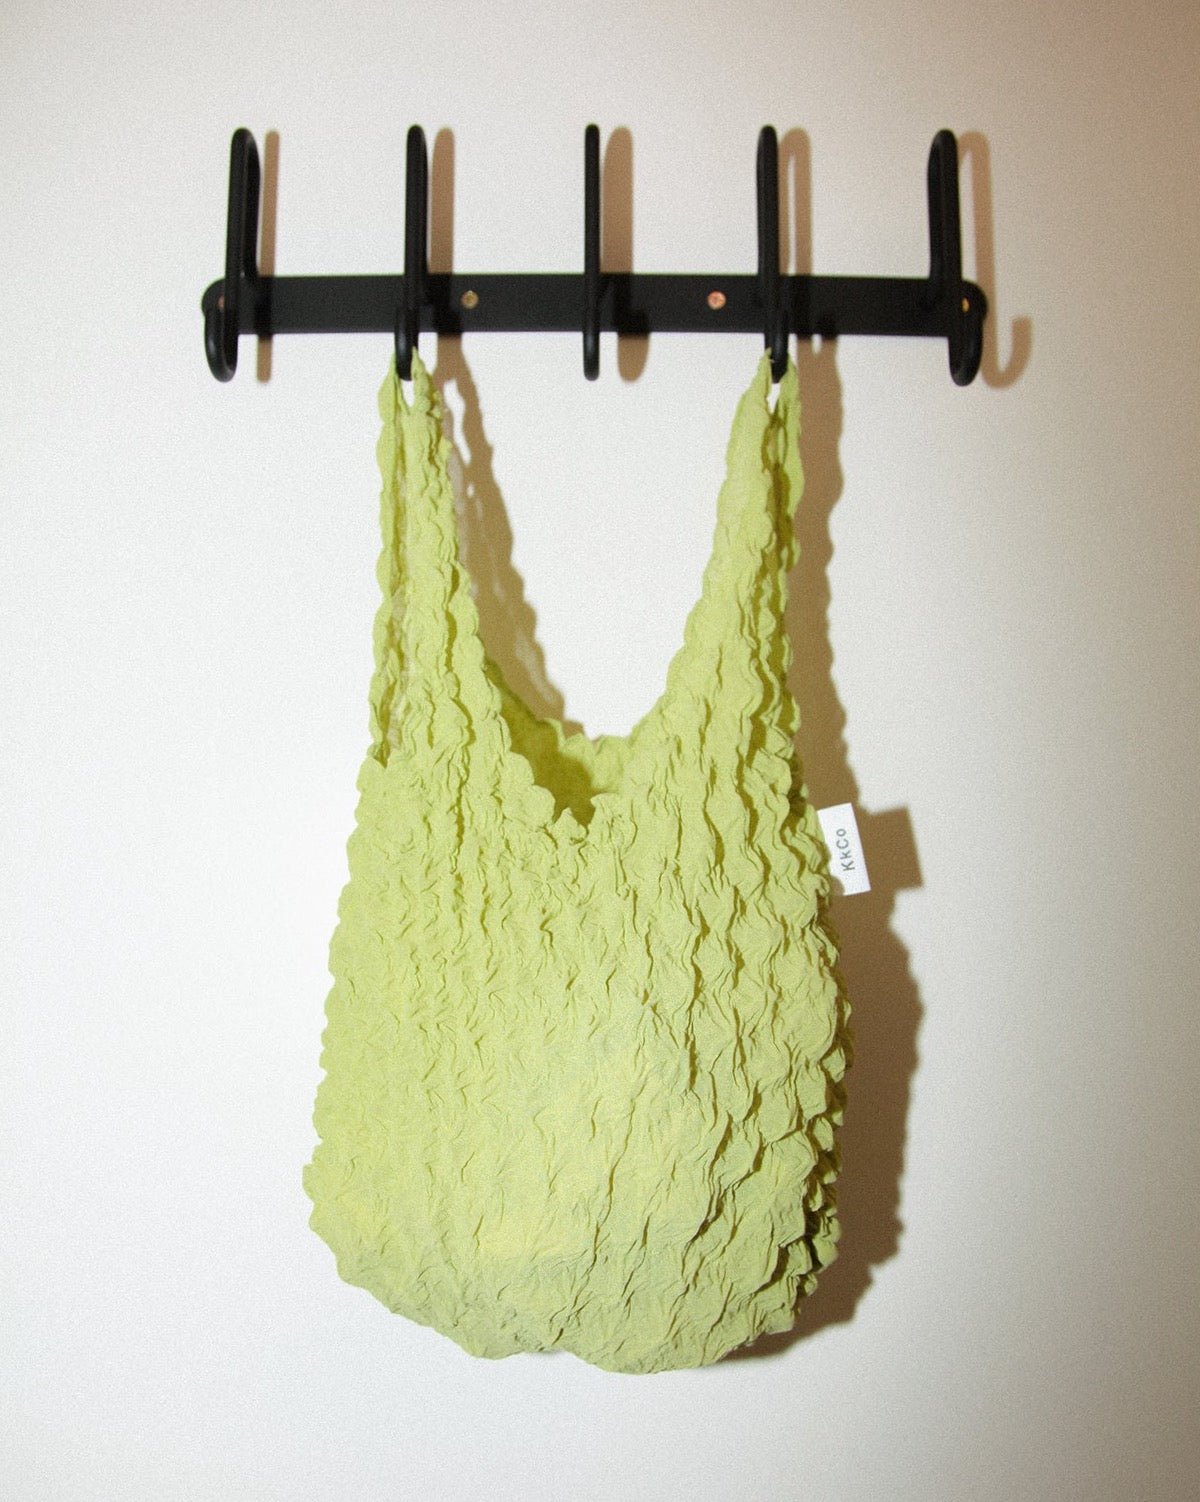 Small Bag in Popcorn Pleated Green Fabric by Kkco hanging from a wall mount coat rack 